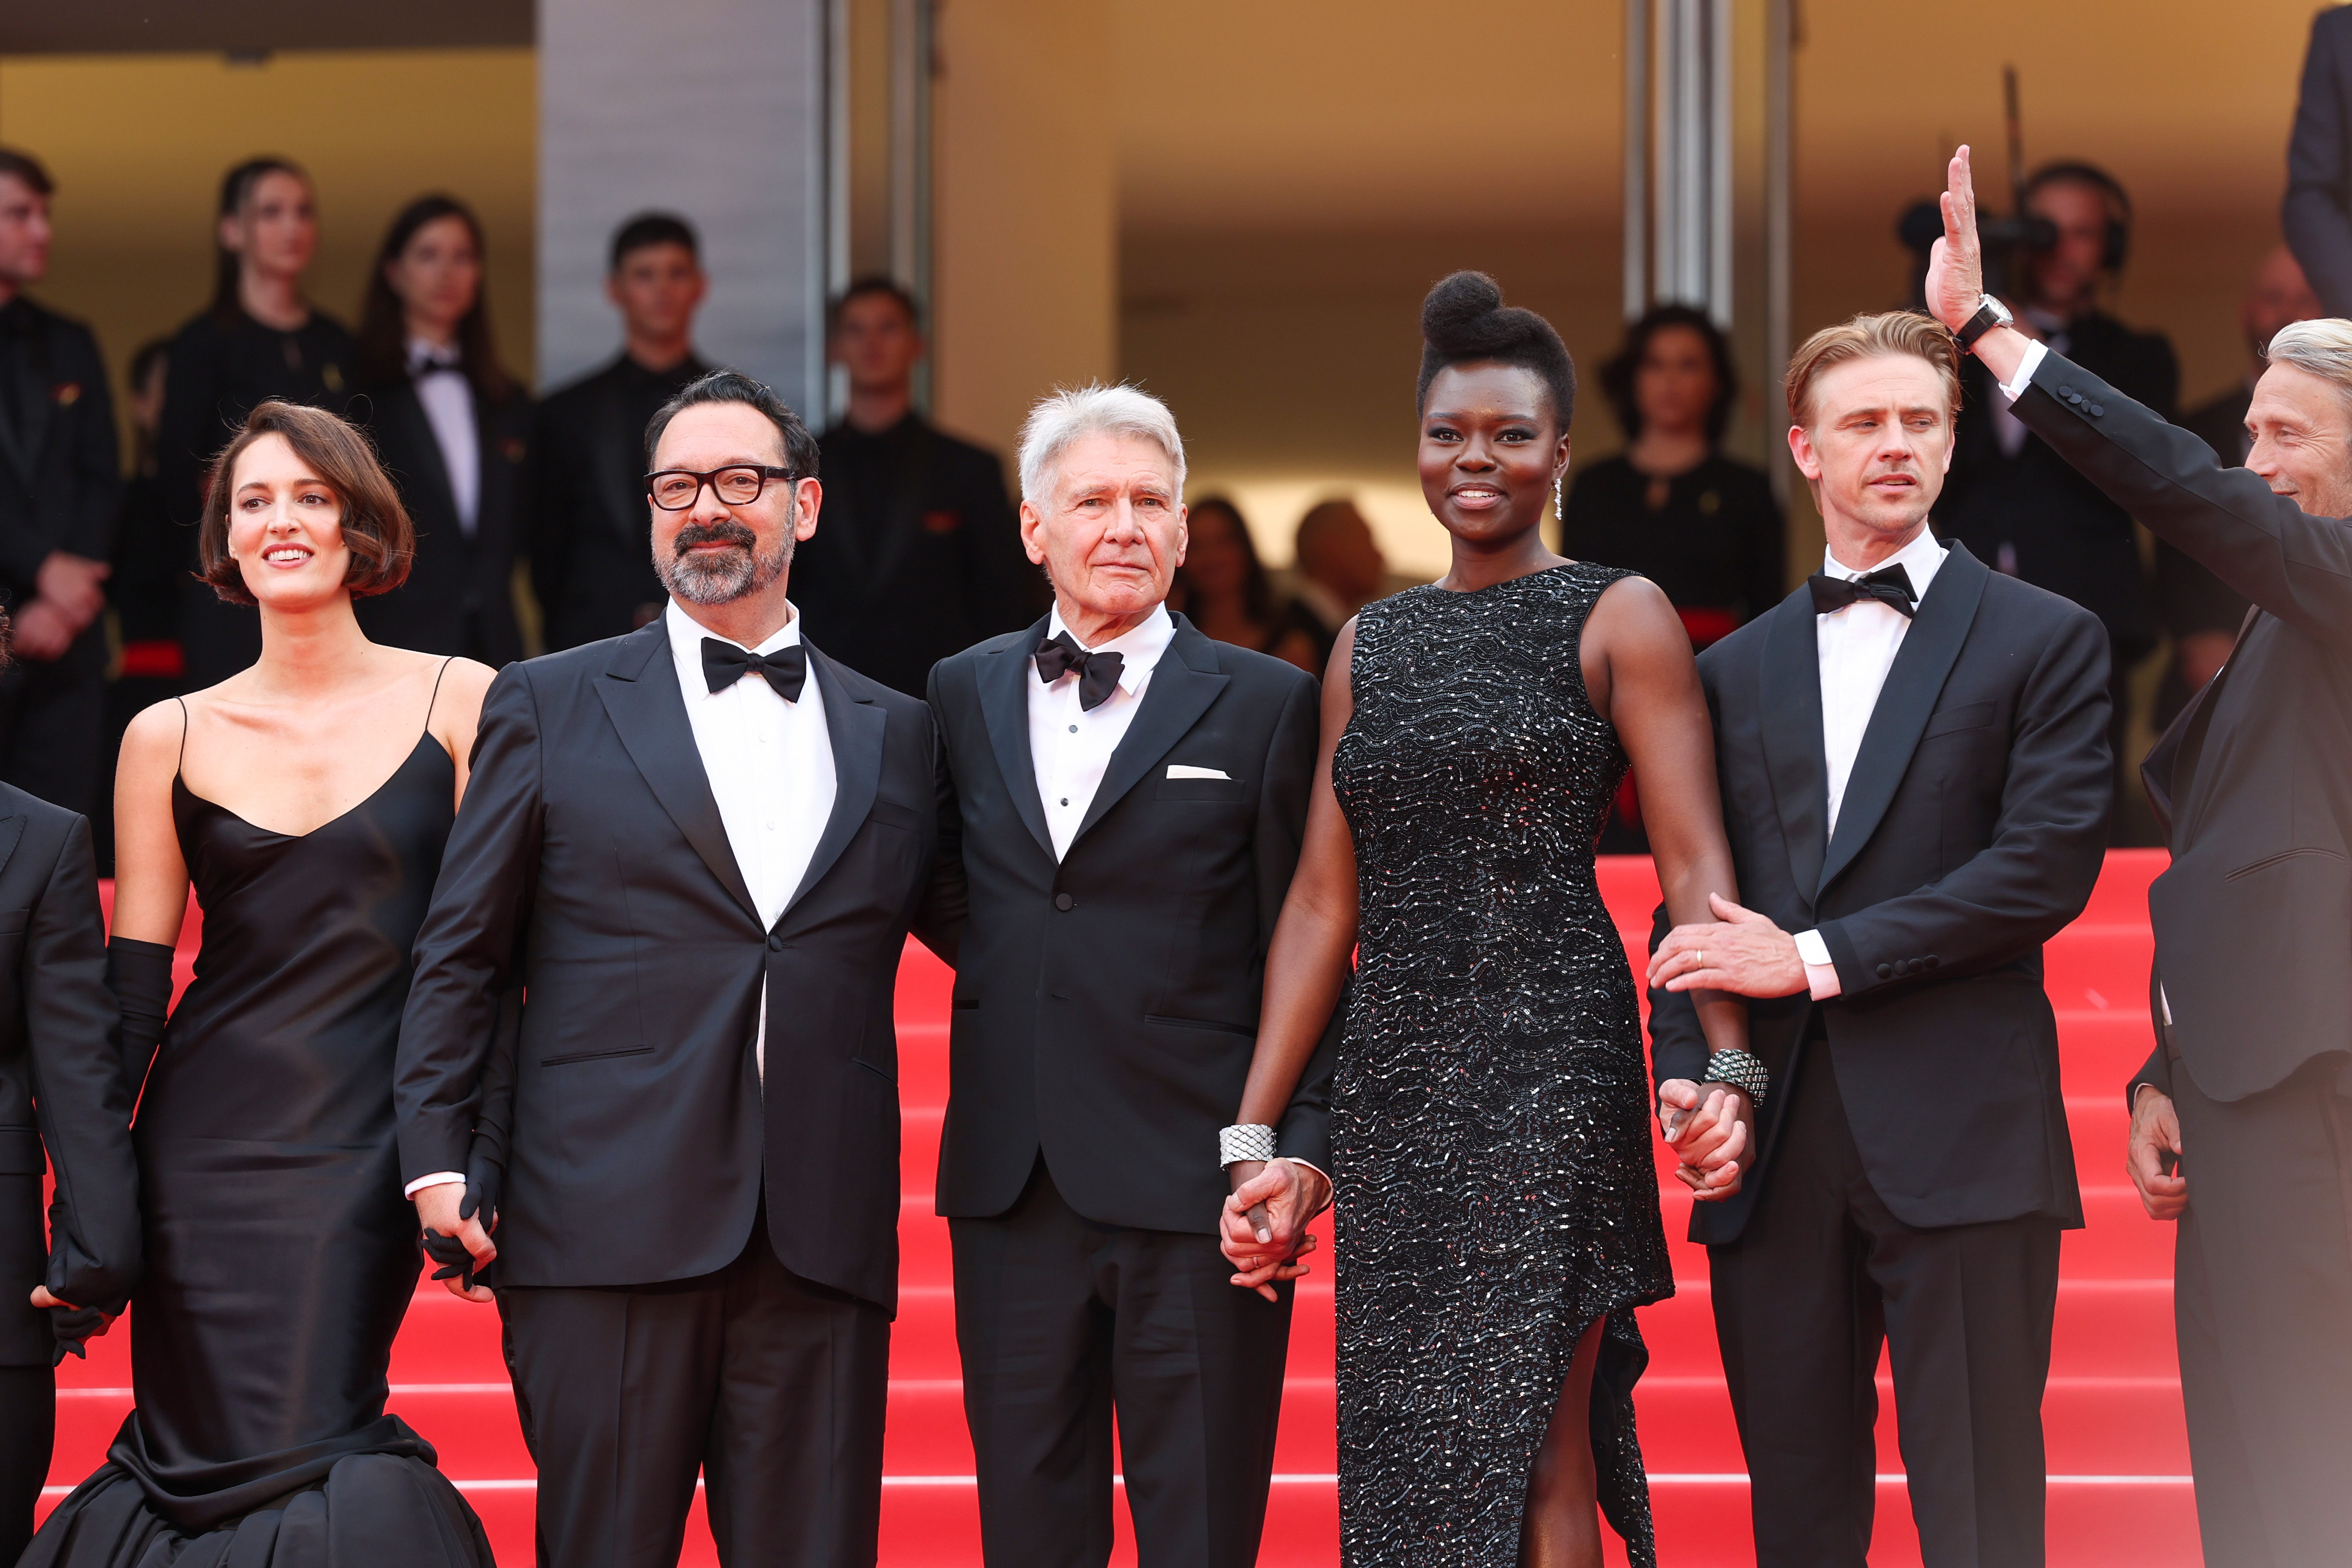 L-R) Phoebe Waller-Bridge, Director James Mangold, Harrison Ford, Shaunette Renée Wilson, Boyd Holbrook and Mads Mikkelsen attend the "Indiana Jones And The Dial Of Destiny" red carpet at Palais des Festivals on May 18, 2023, in Cannes, France. | Source: Getty Images